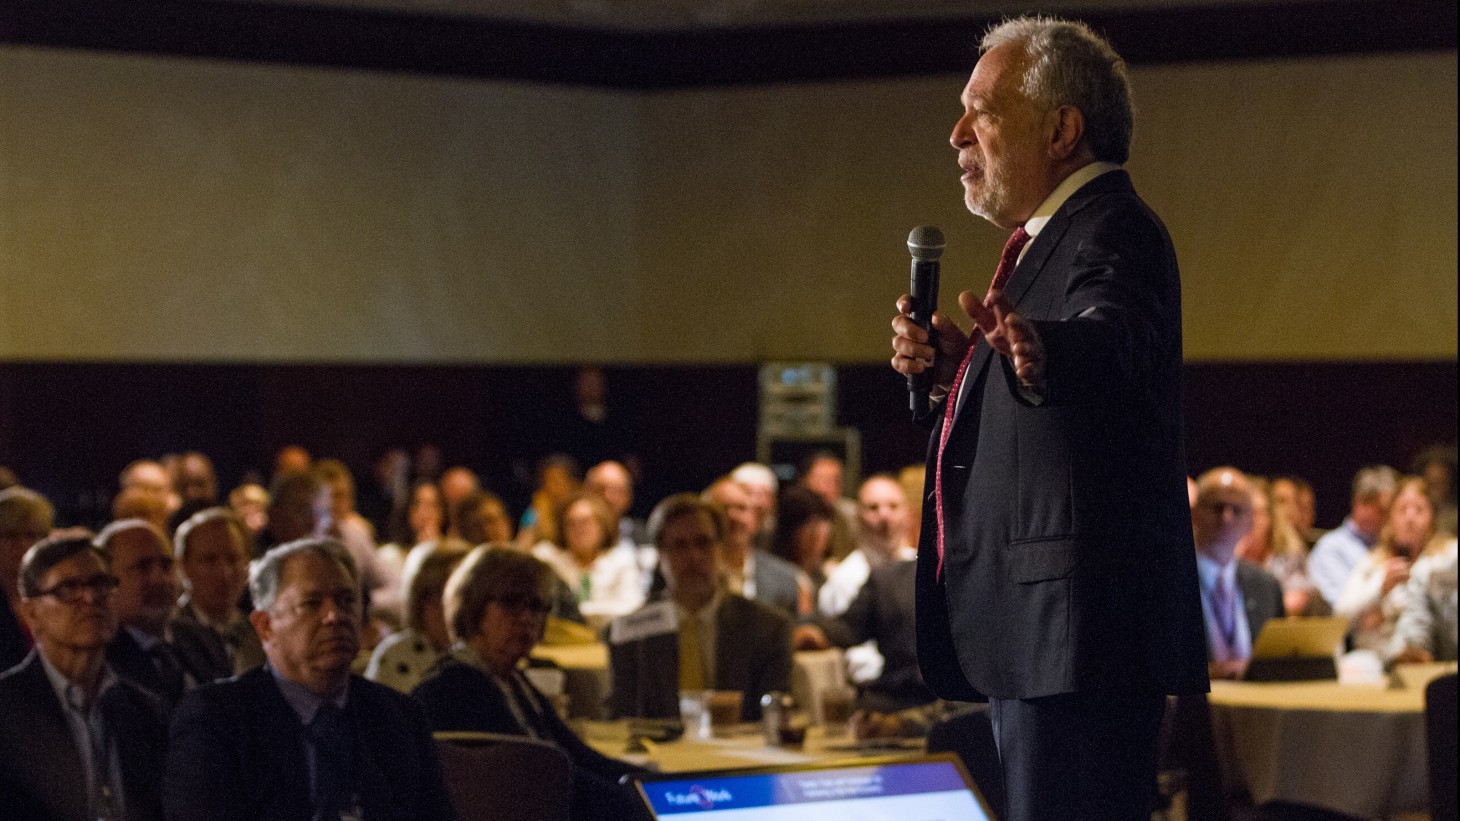 Robert Reich speaking at a conference 